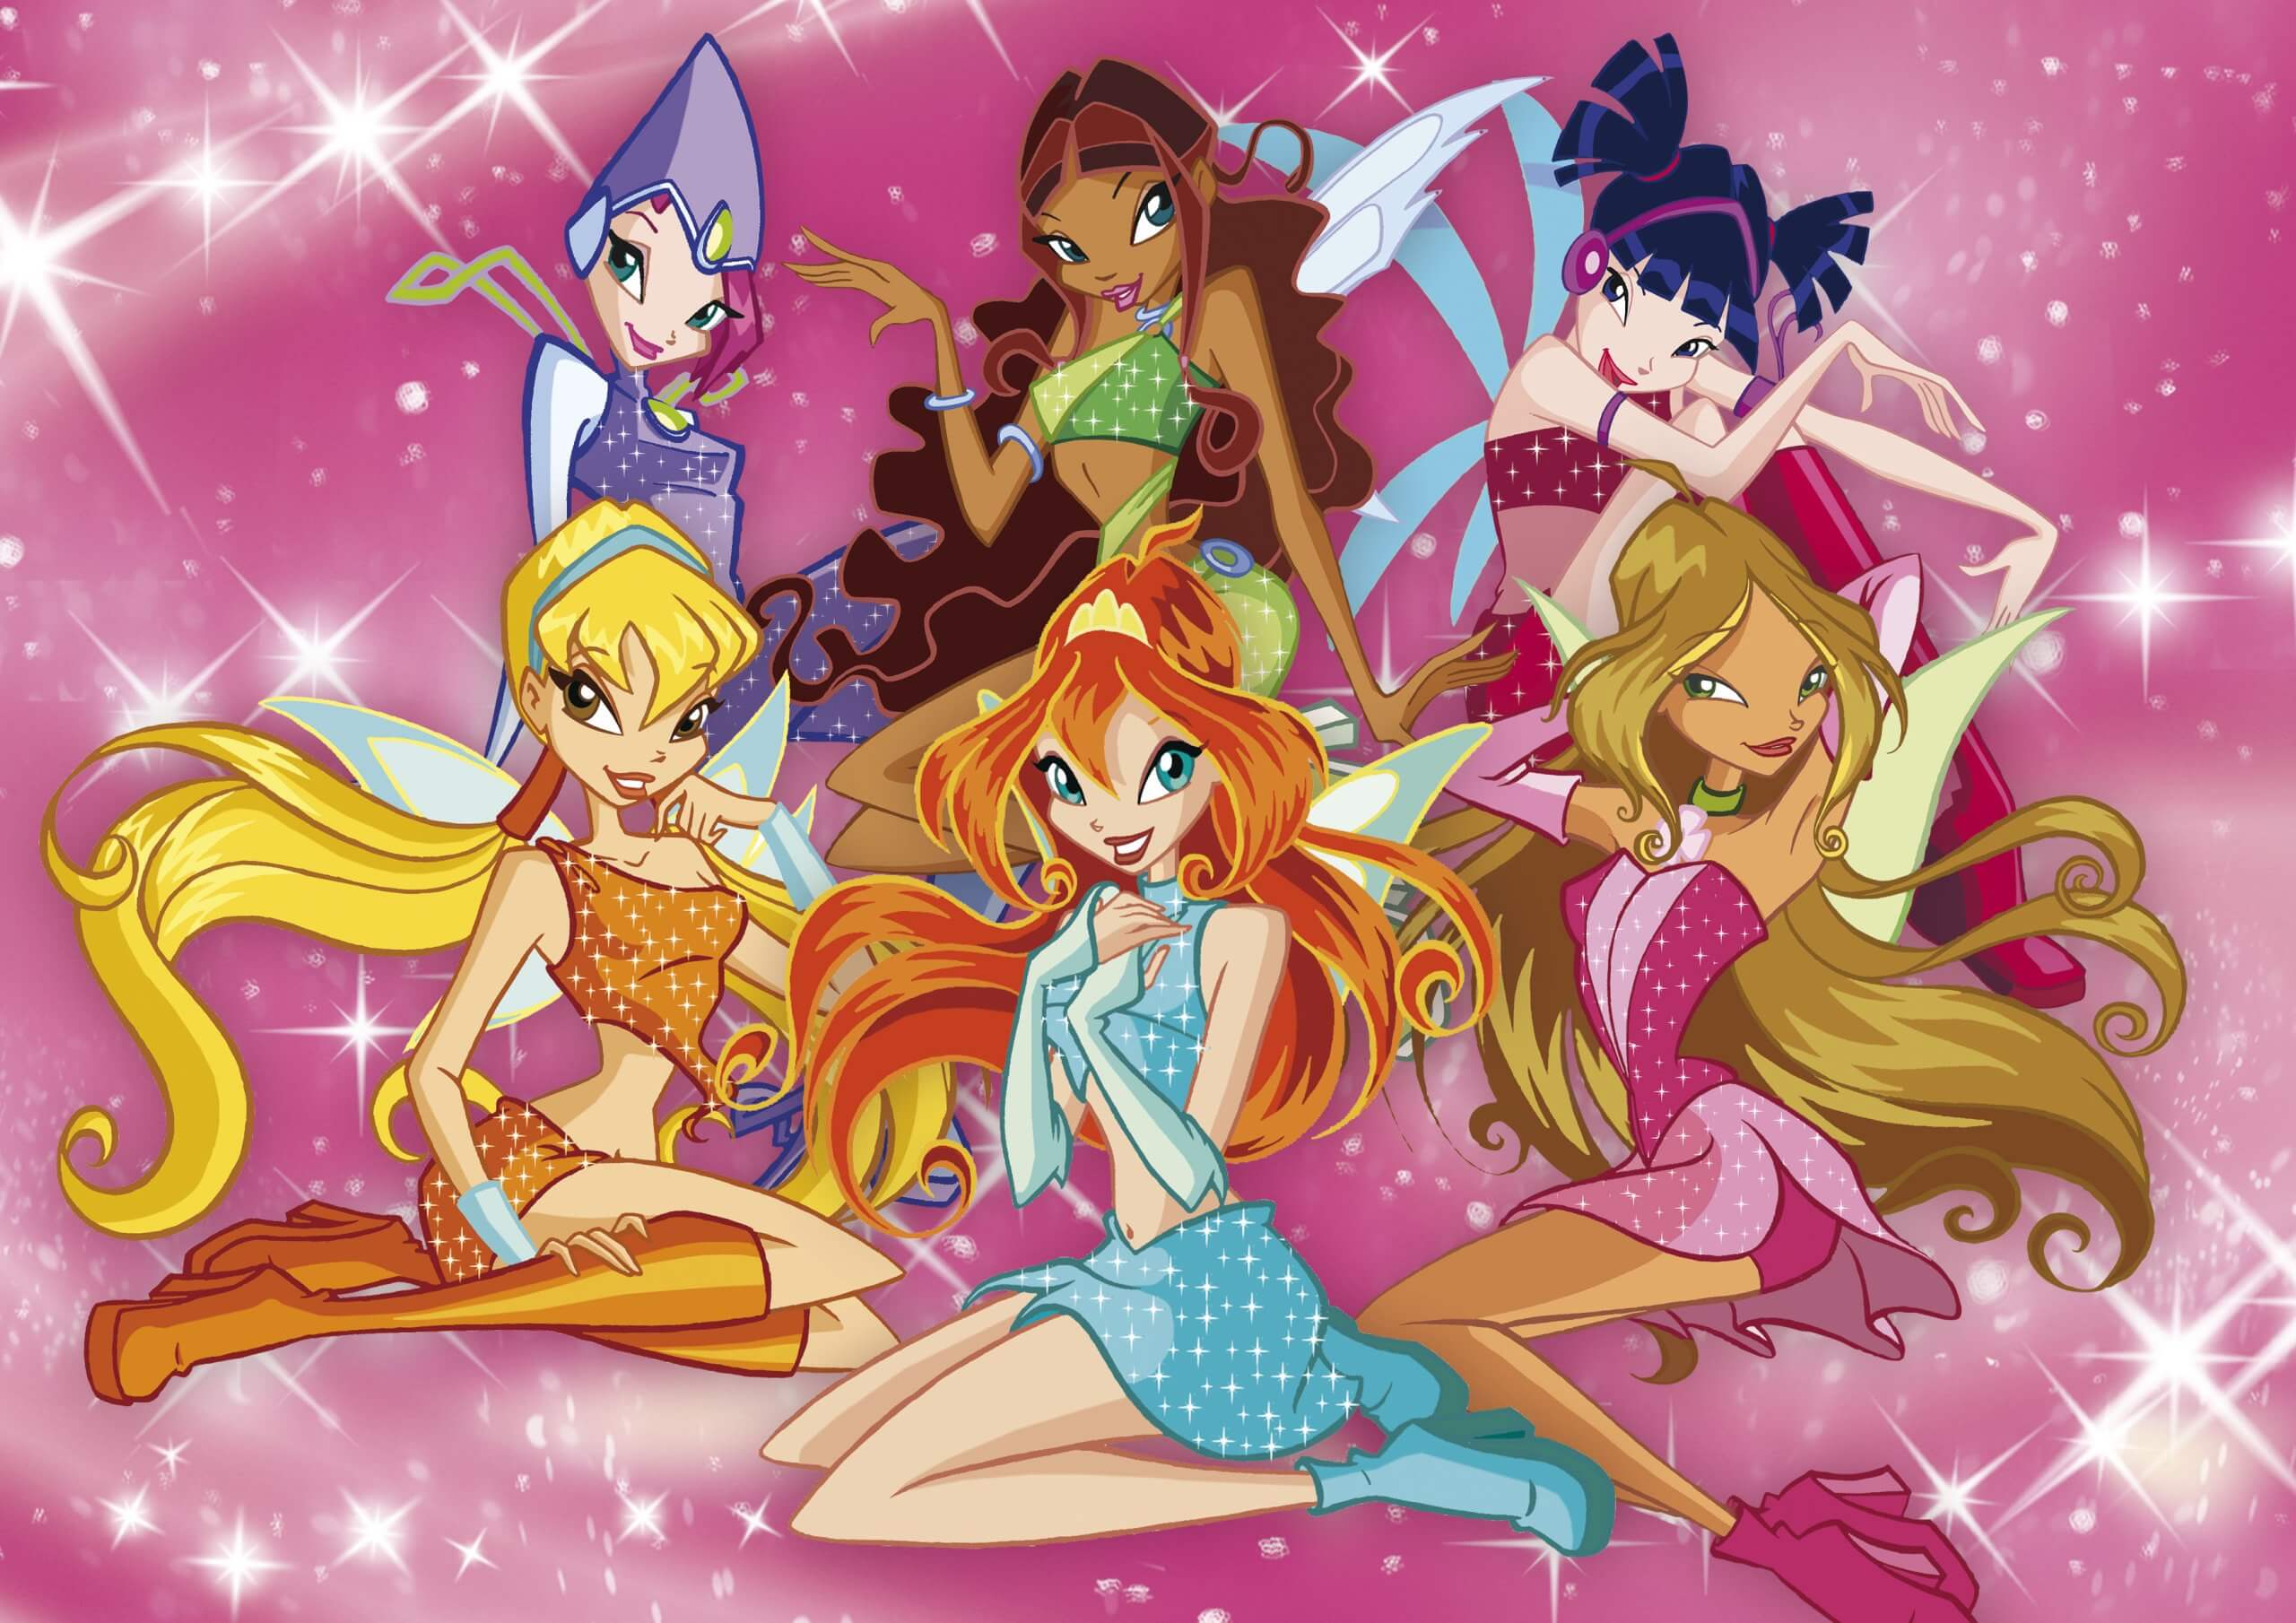 Winx Club turns 18: on January 28th 2004 the tv classic made its debut on Rai Due image